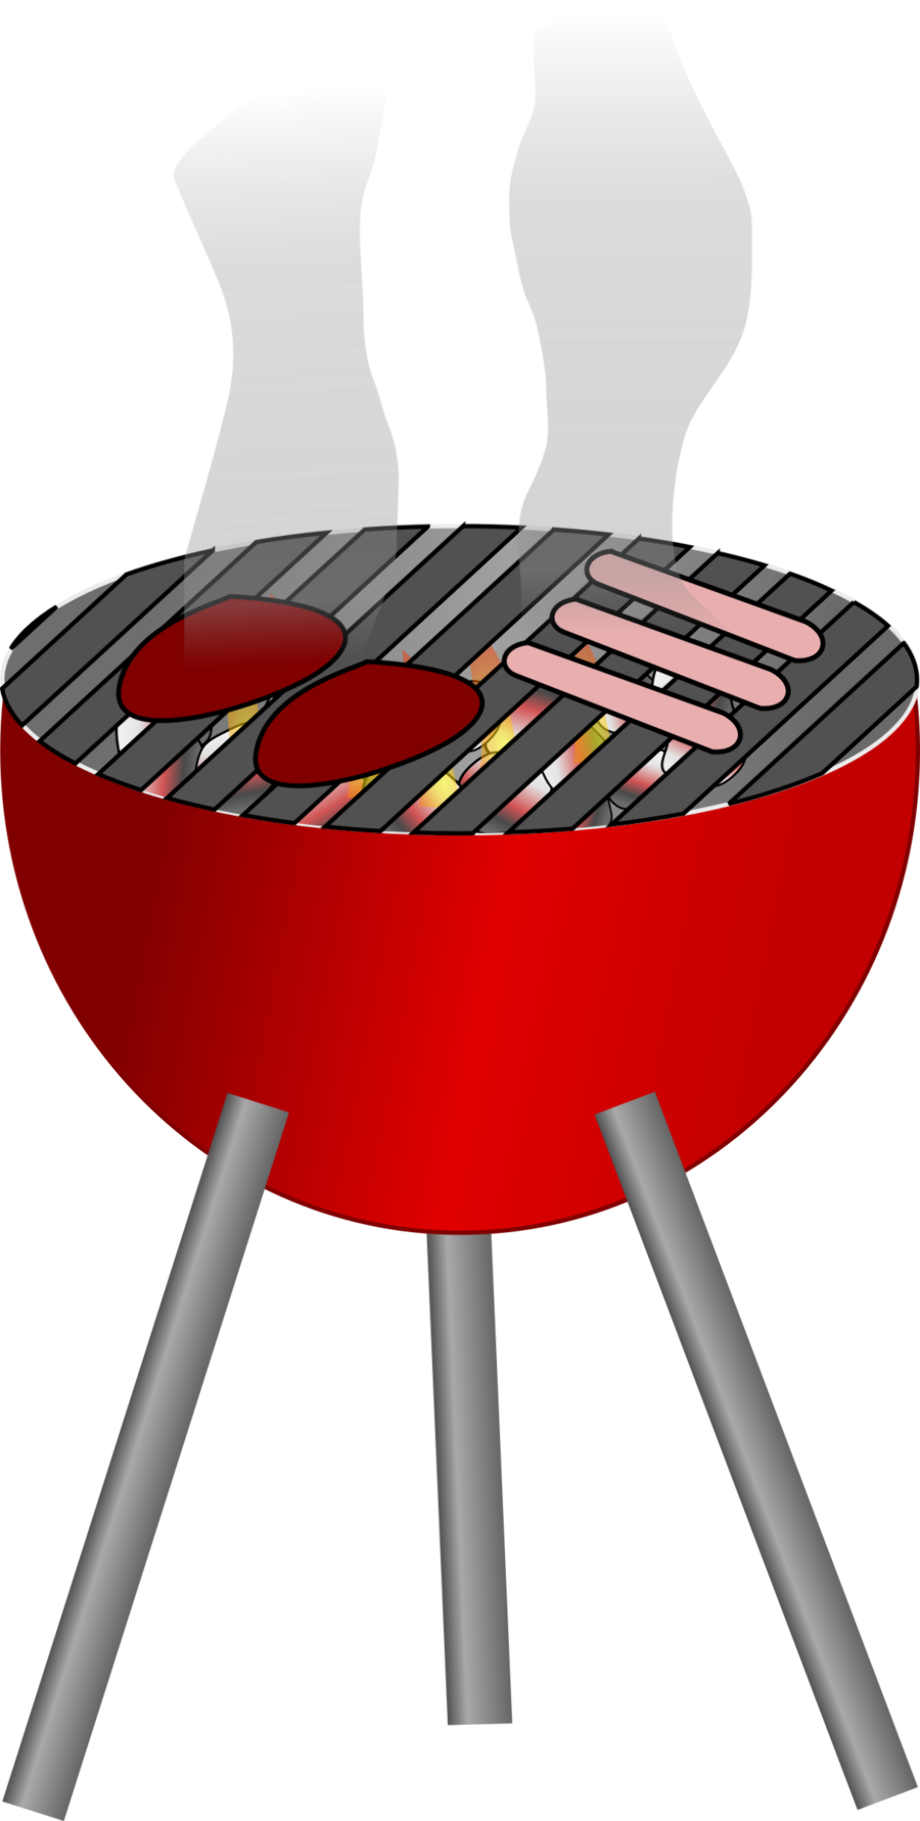 Download High Quality grill clipart cartoon Transparent PNG Images